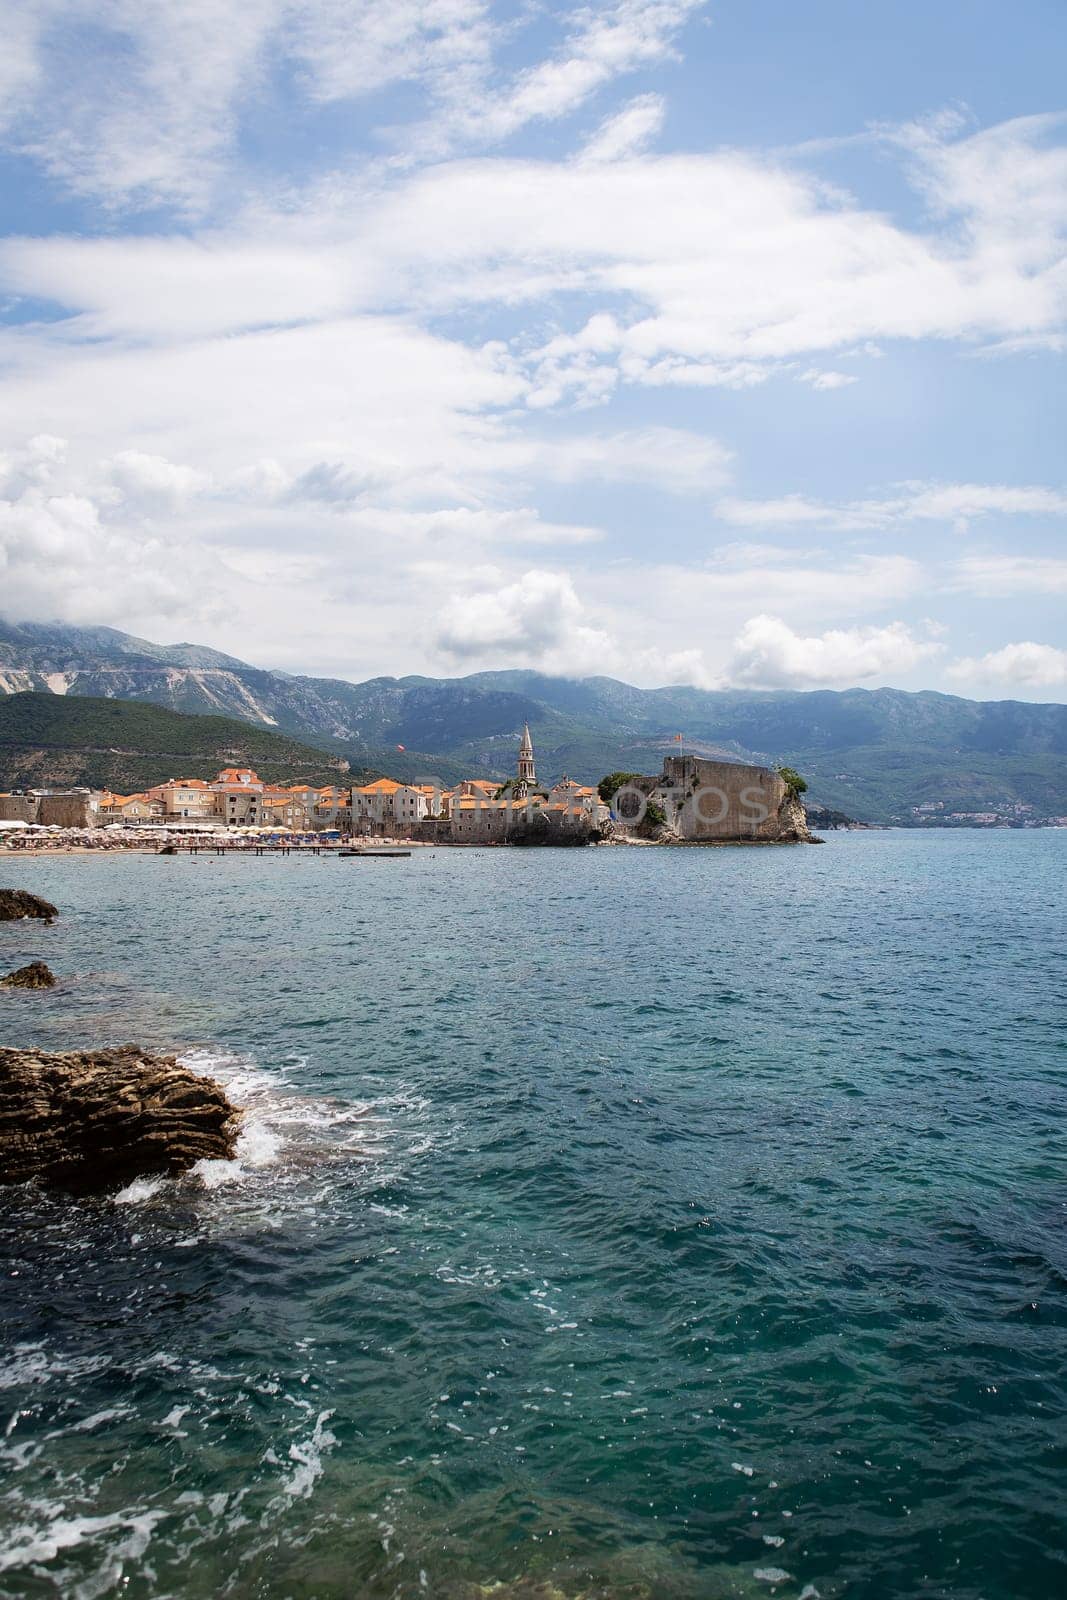 Montenegro, Budva, very beautiful view of the old town and citadel in Budva. Beautiful clouds on a warm day